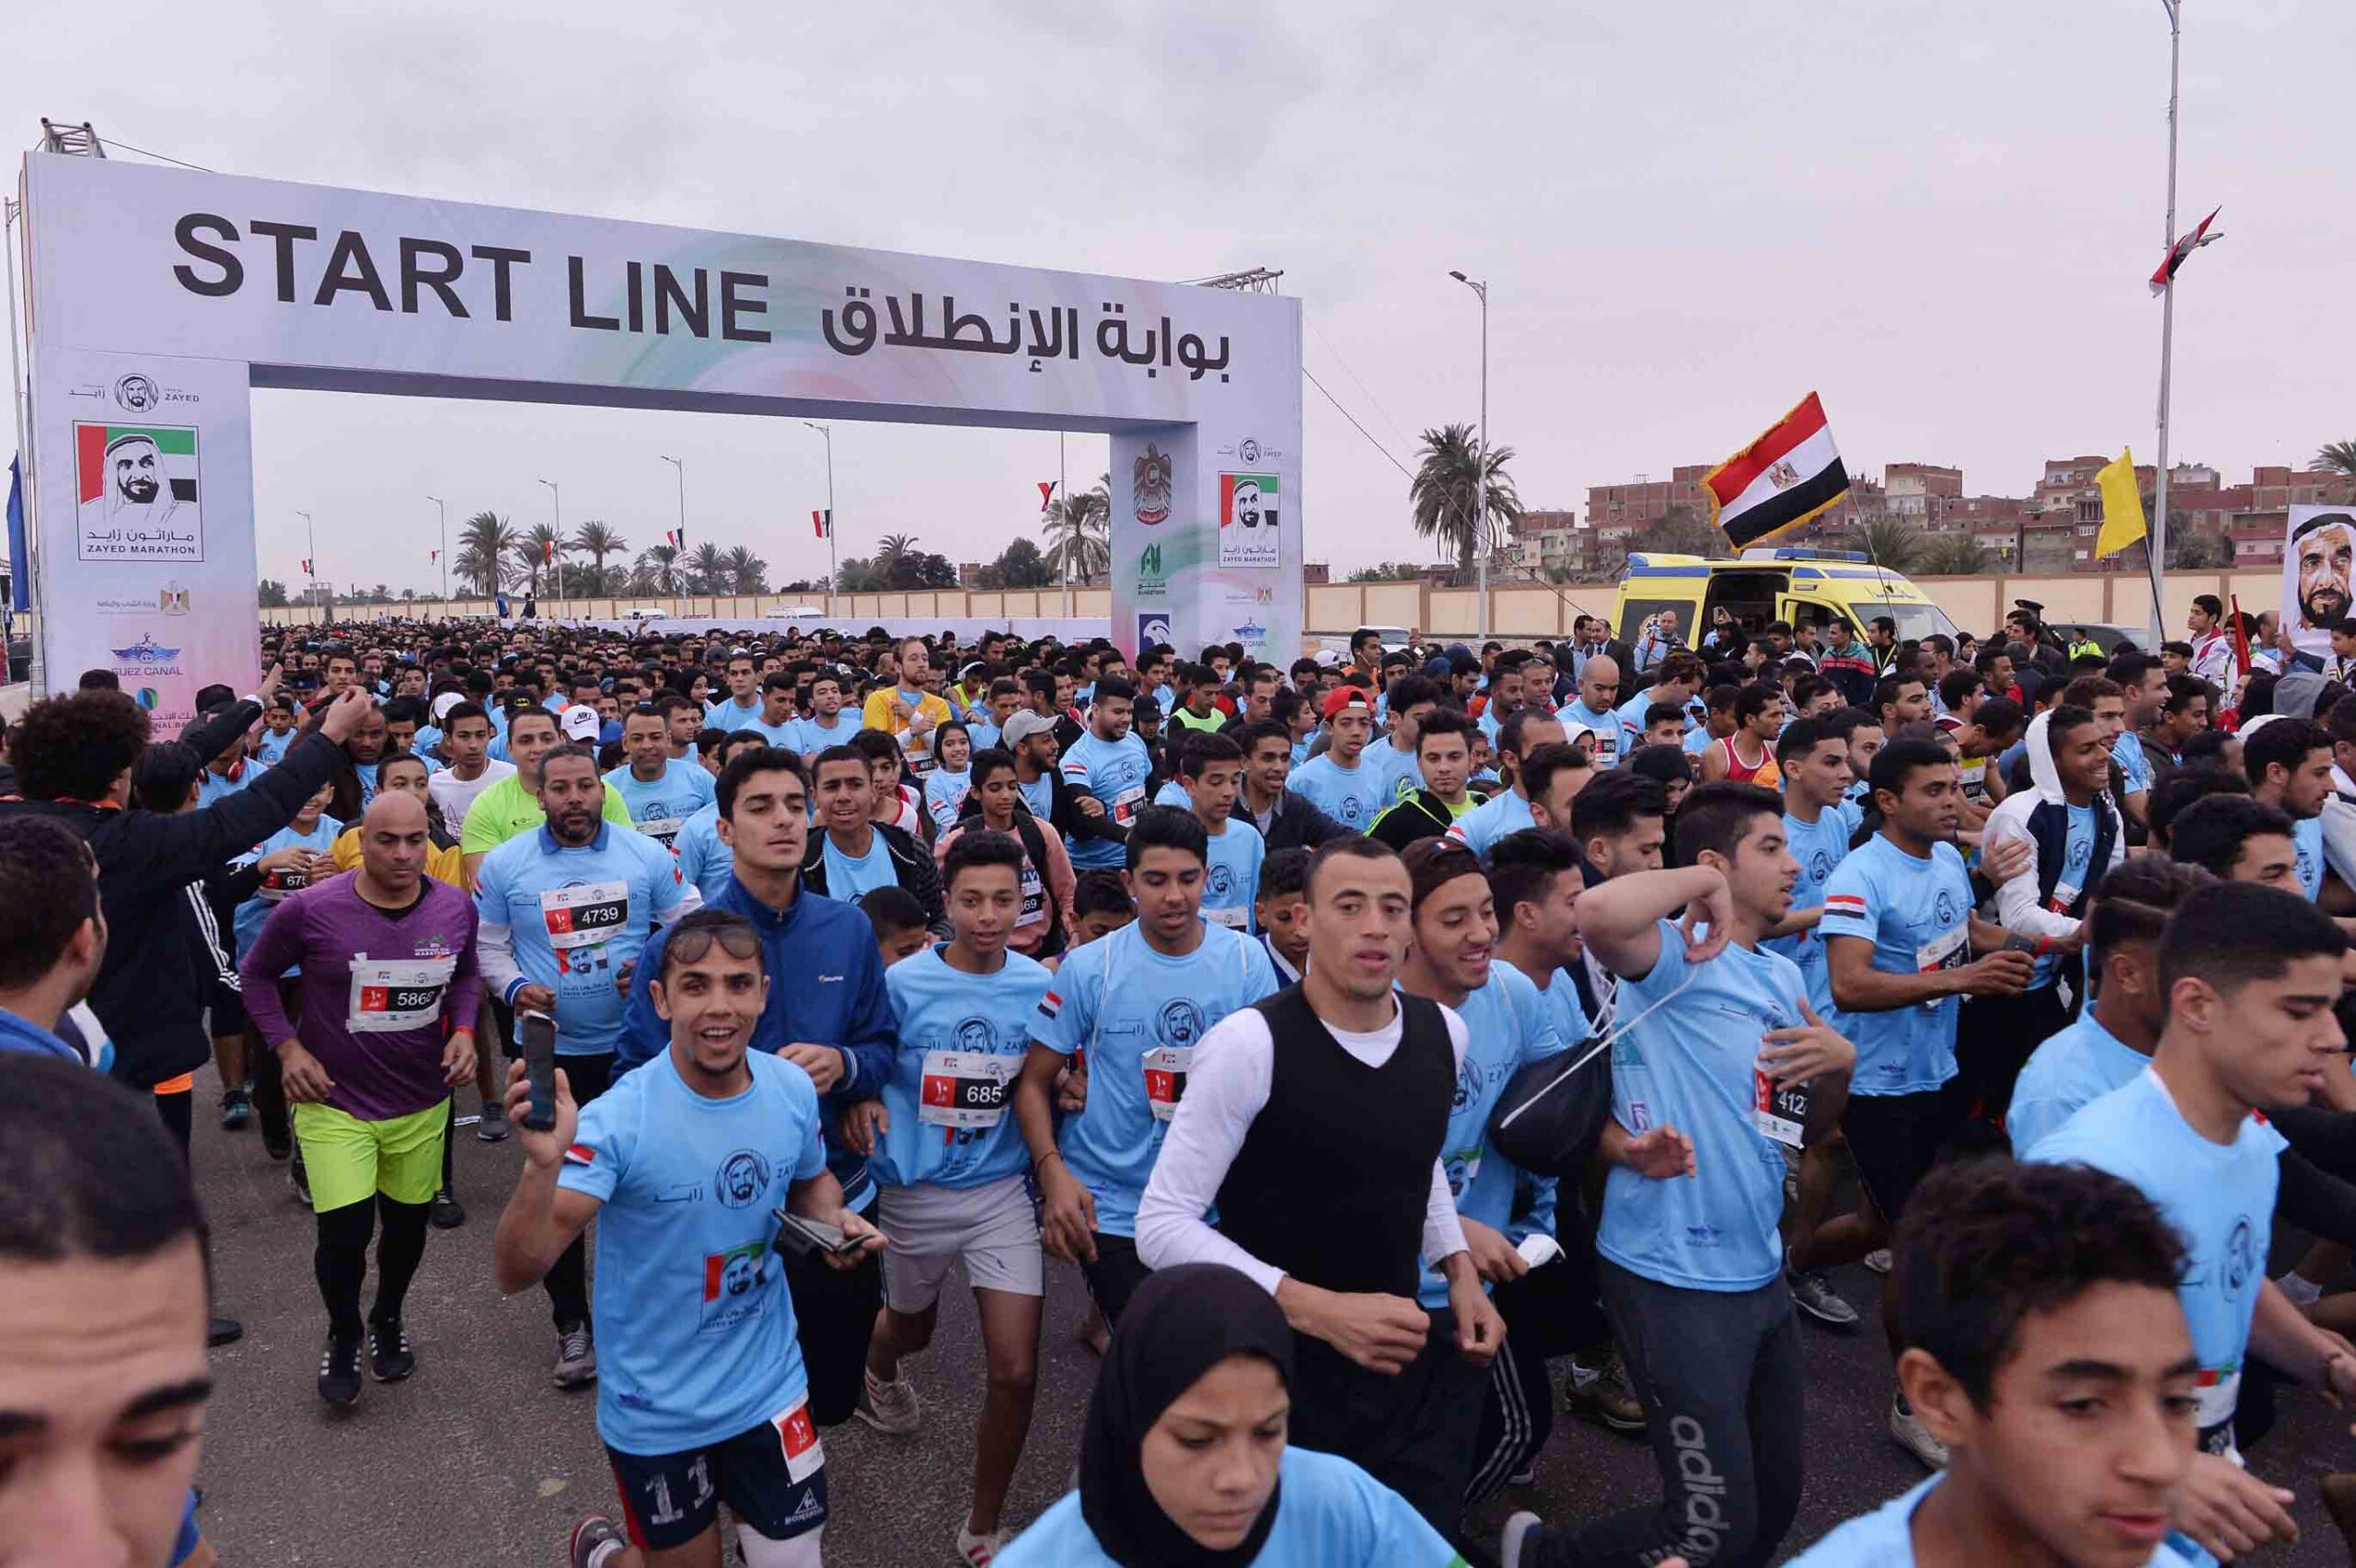 Runners at the start line in the Zayed Charity Marathon 2018 in Ismailia, Egypt